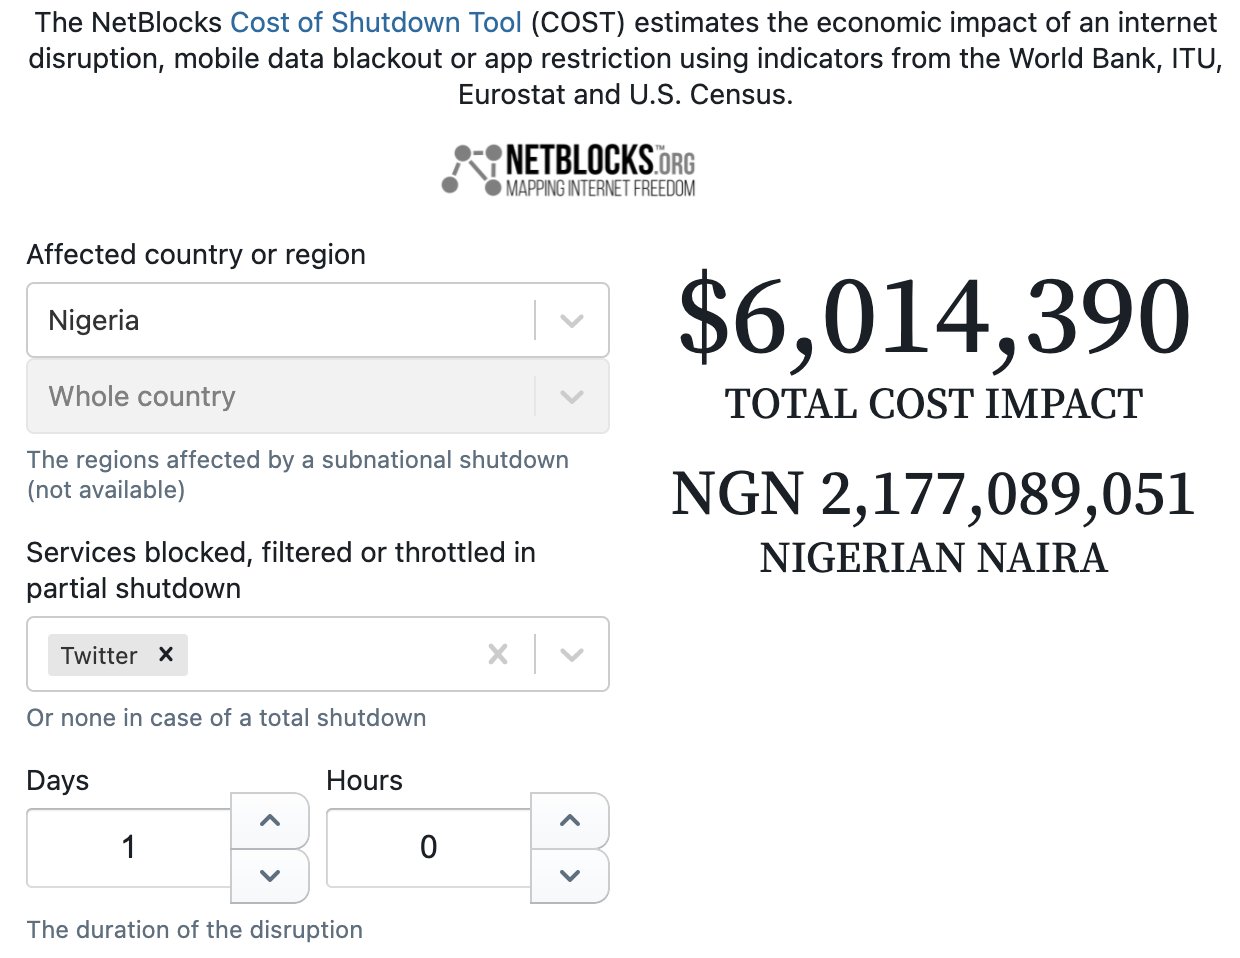 Nigeria Loses Over N2bn Since #TwitterBan, Set To Lose N90m More Hourly - Report